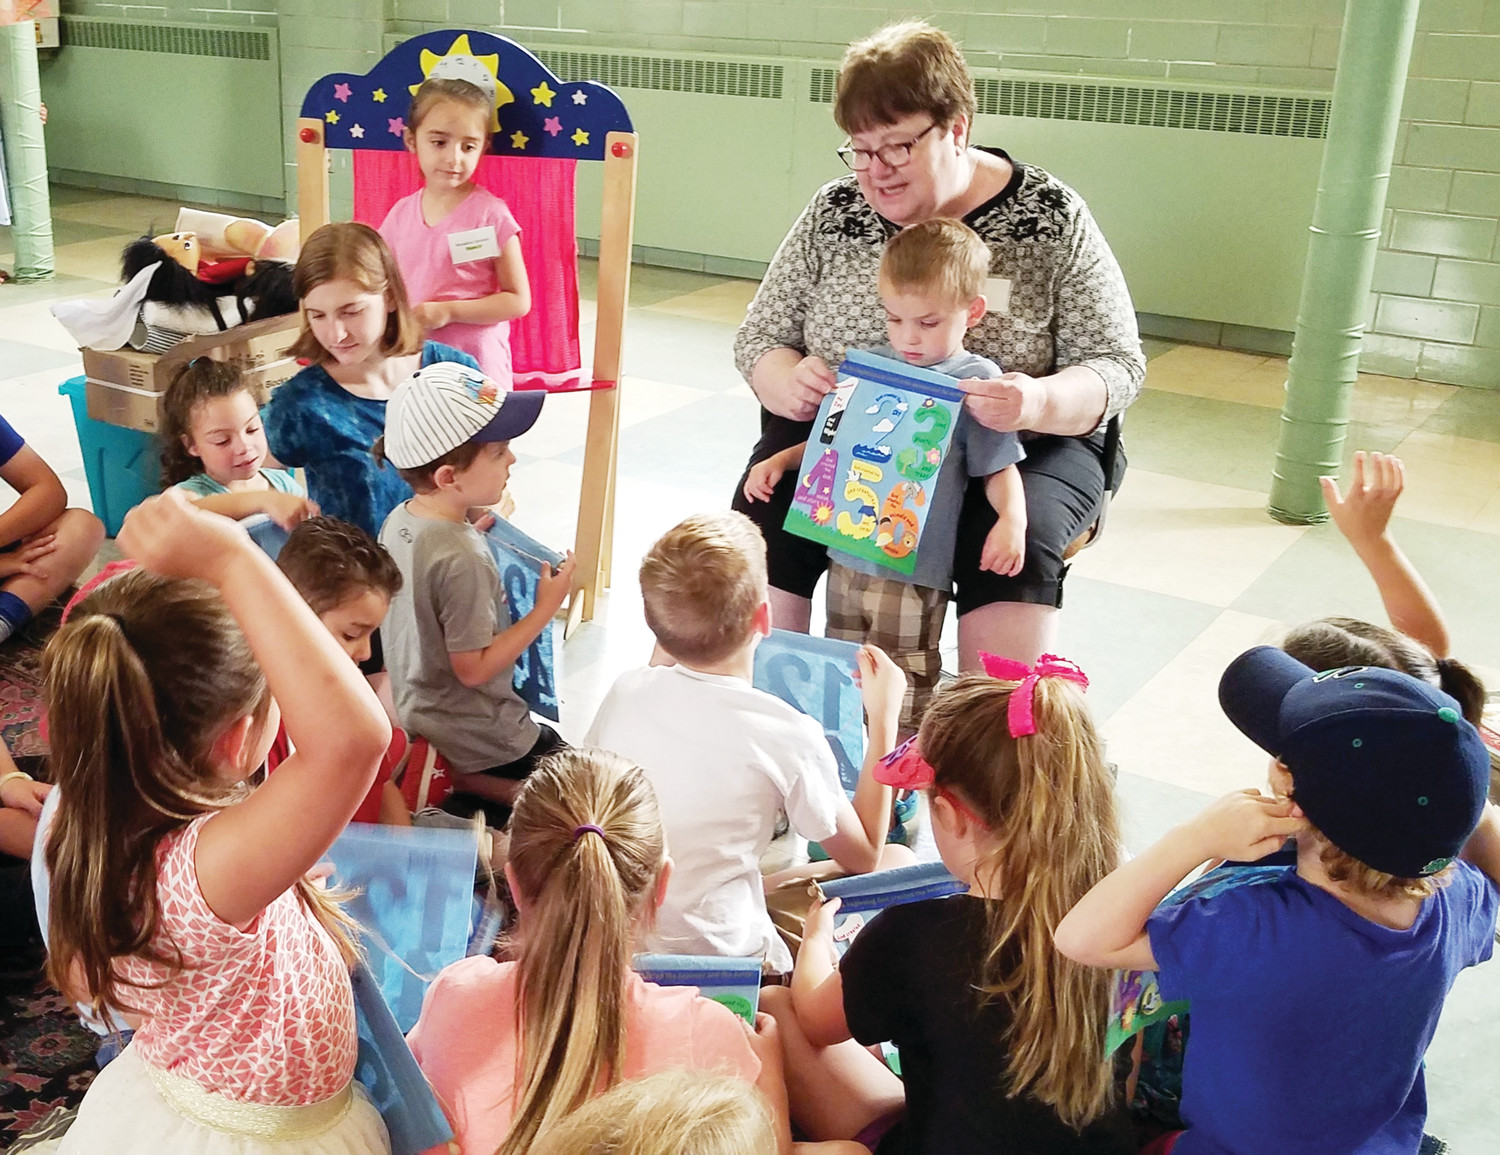 Christine Magowan, director of Faith Formation and Evangelization at St. Pius X Parish in Westerly, planned a successful five-day morning Vacation Bible School program for about 25 of the parish’s children. Above Magowan talks to the children about the creation story.